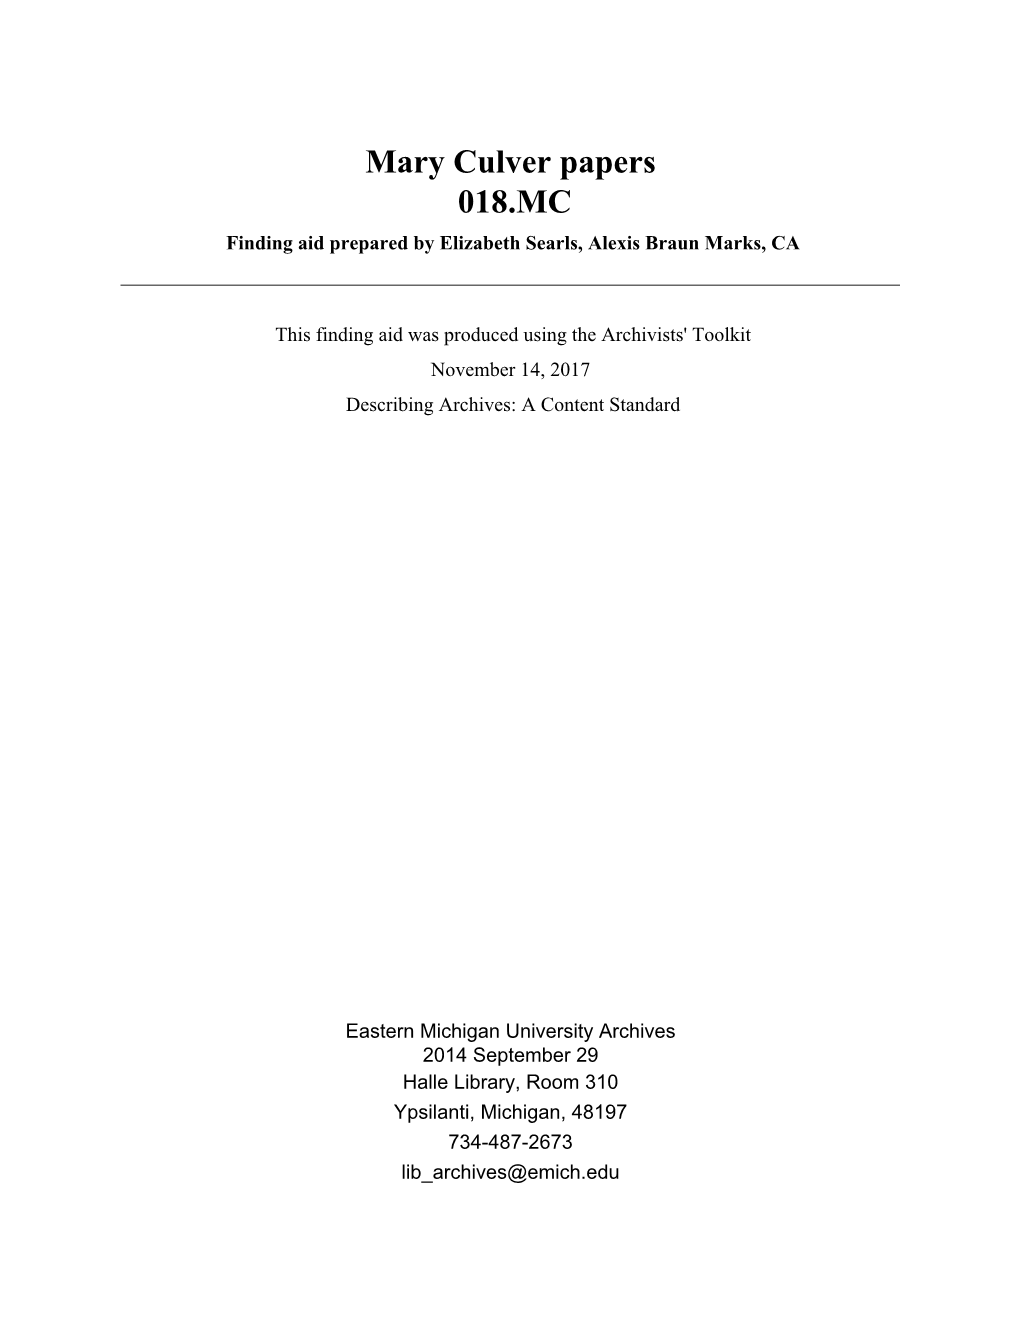 Mary Culver Papers 018.MC Finding Aid Prepared by Elizabeth Searls, Alexis Braun Marks, CA